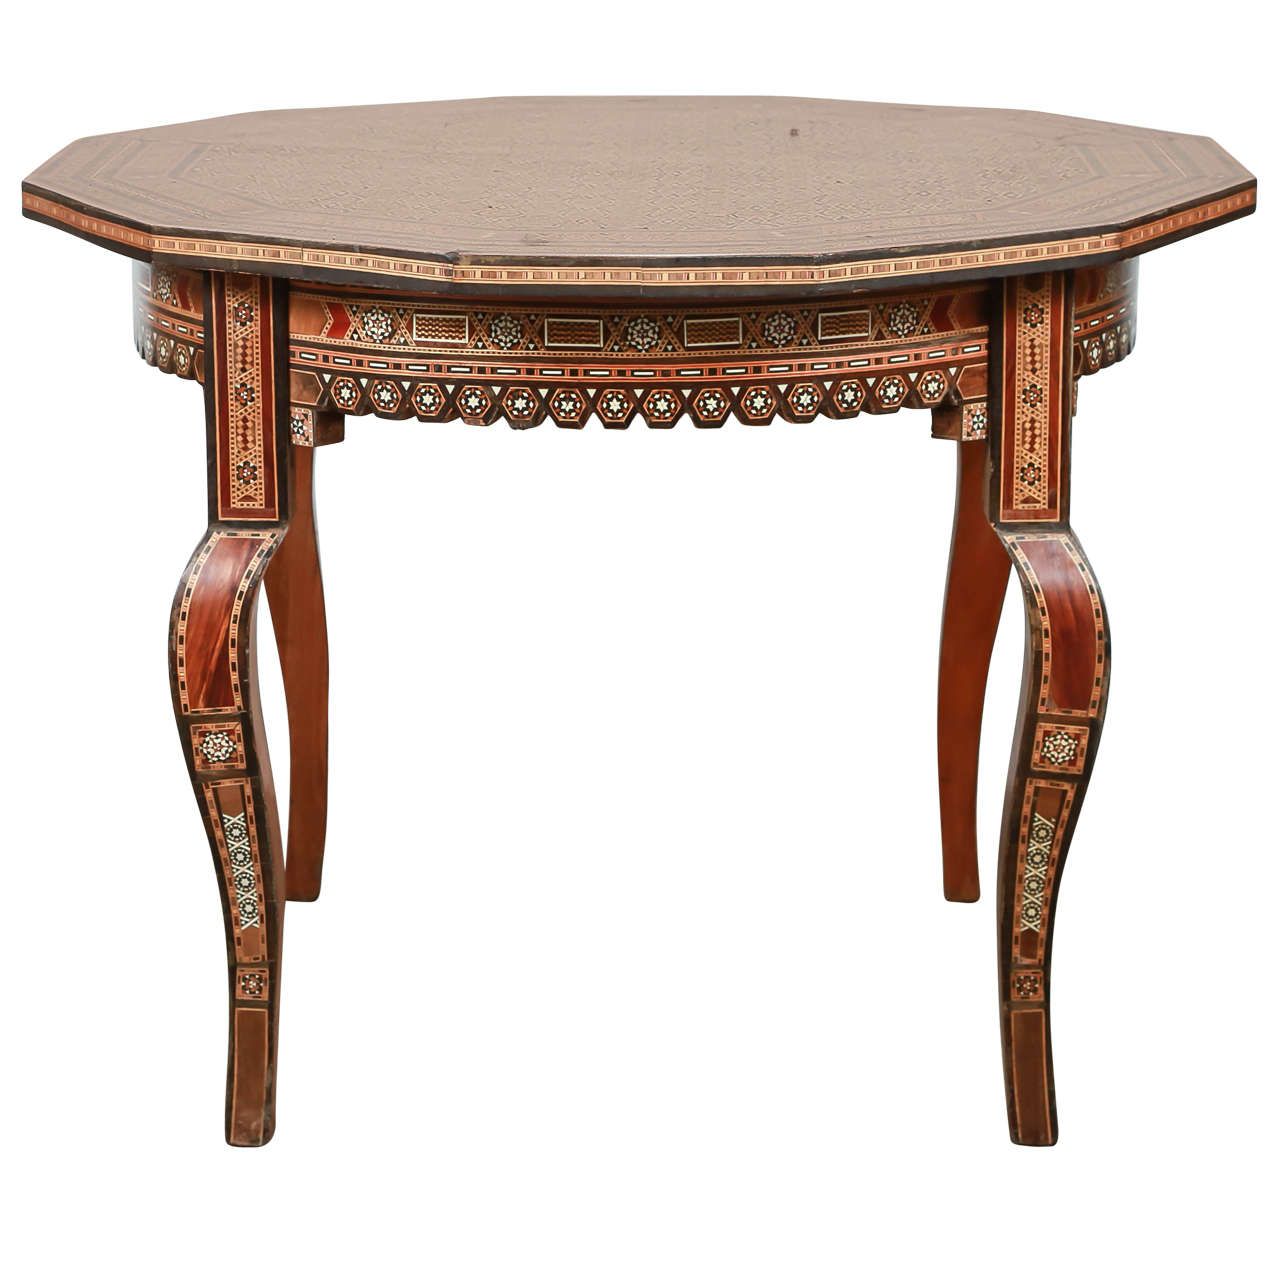 Inlaid Syrian Octagonal Side Coffee Table At 1stdibs Regarding Fashionable Octagon Coffee Tables (View 13 of 20)